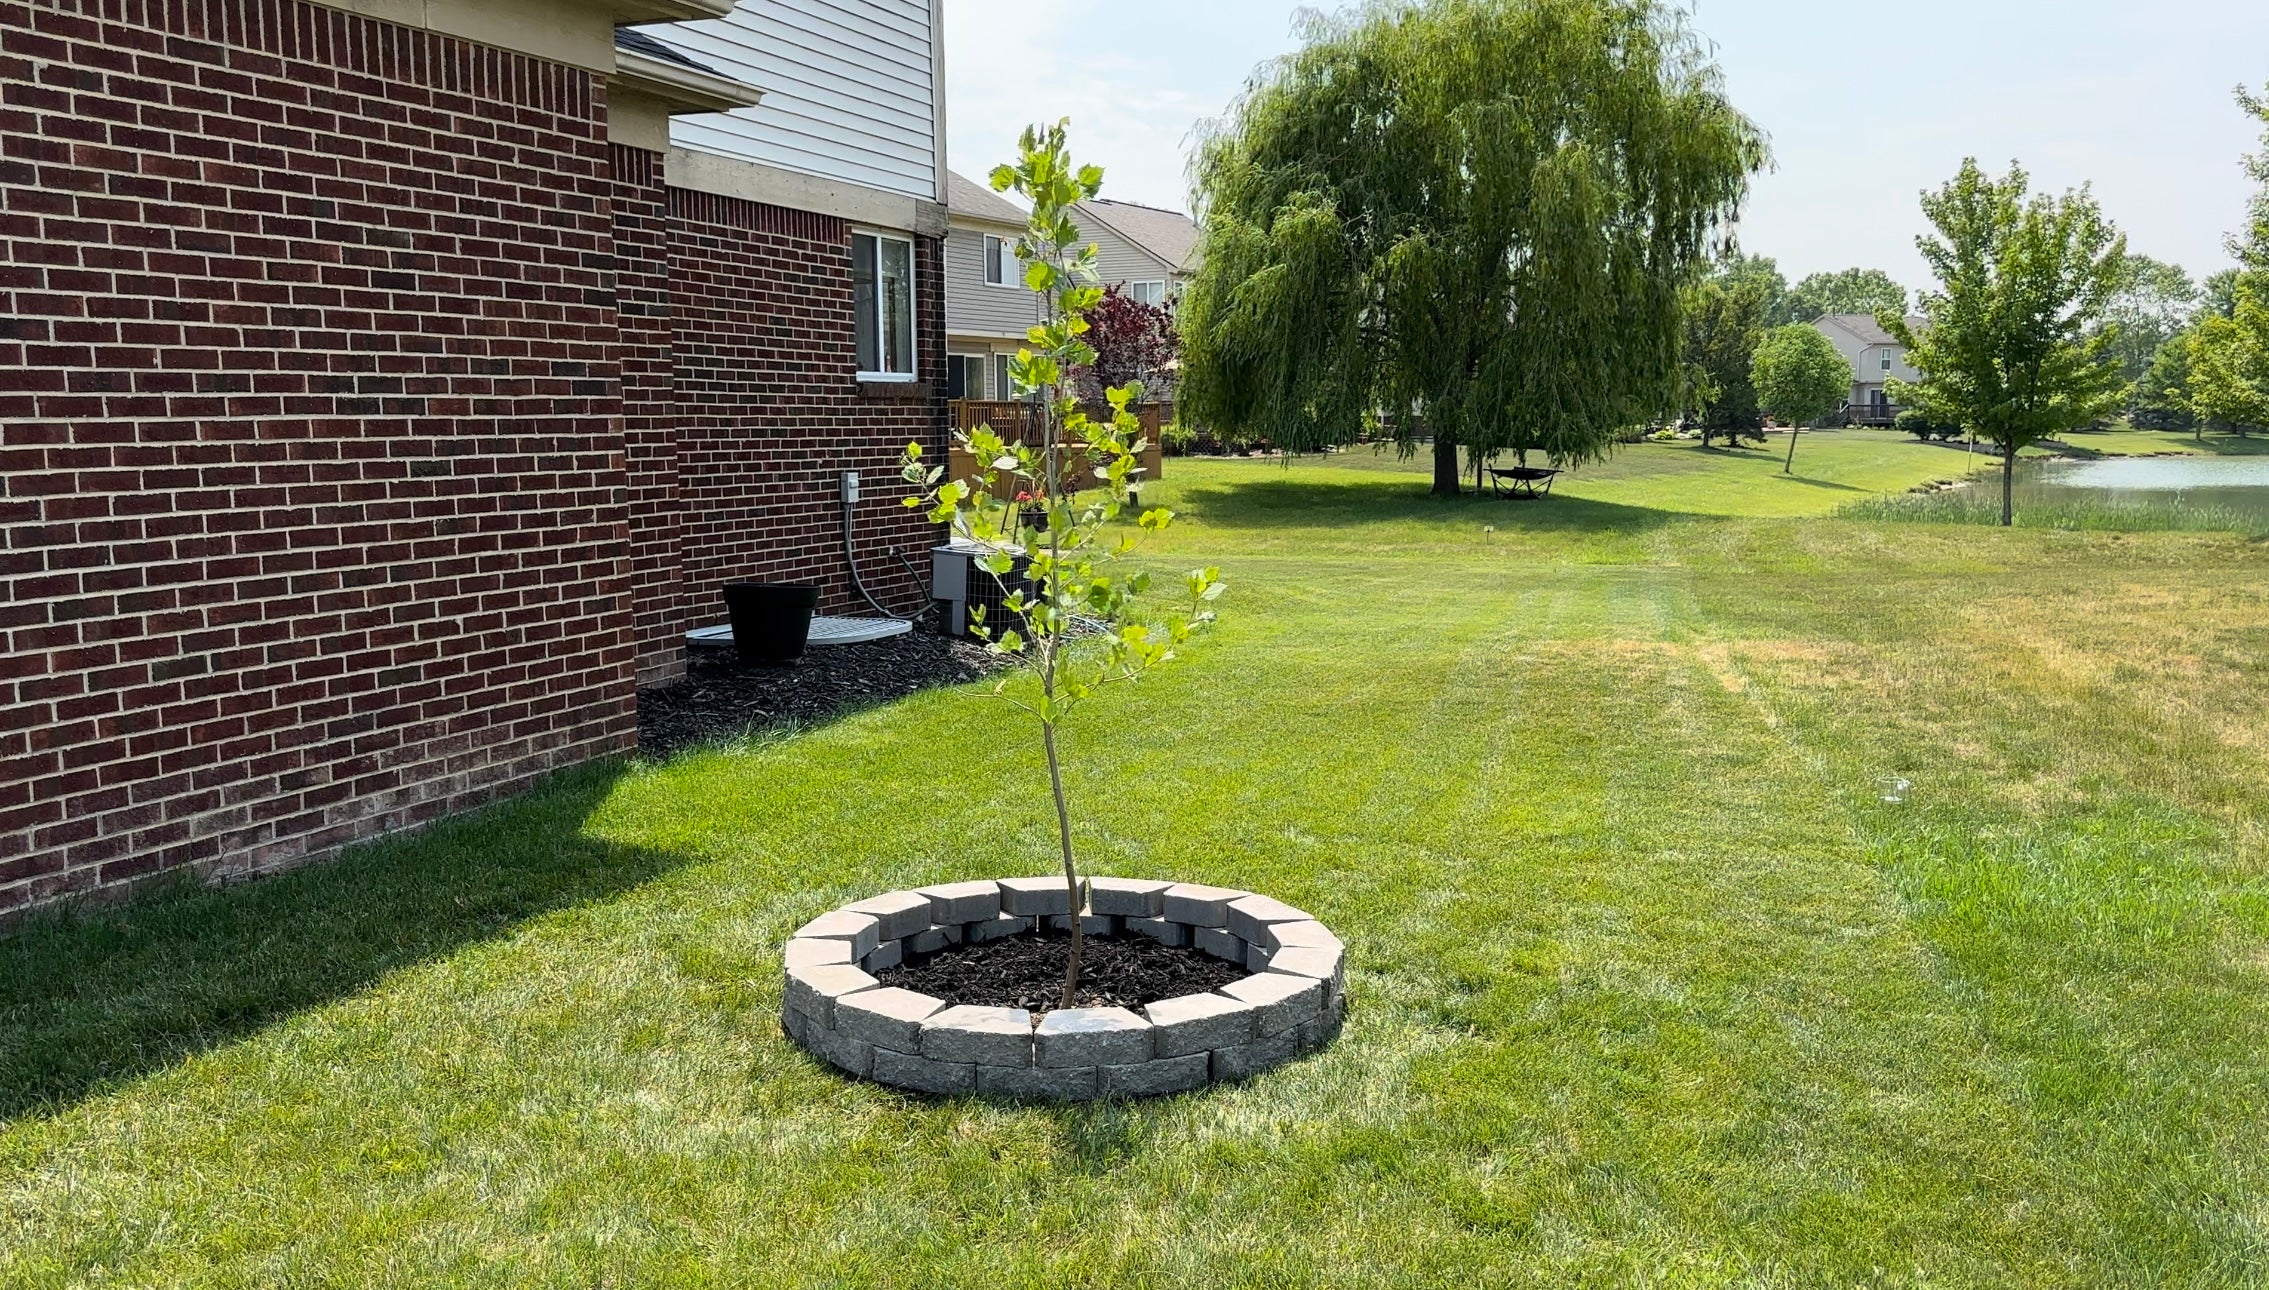 Load video: PaverTrax - Building a paver tree ring in less than 10 minutes